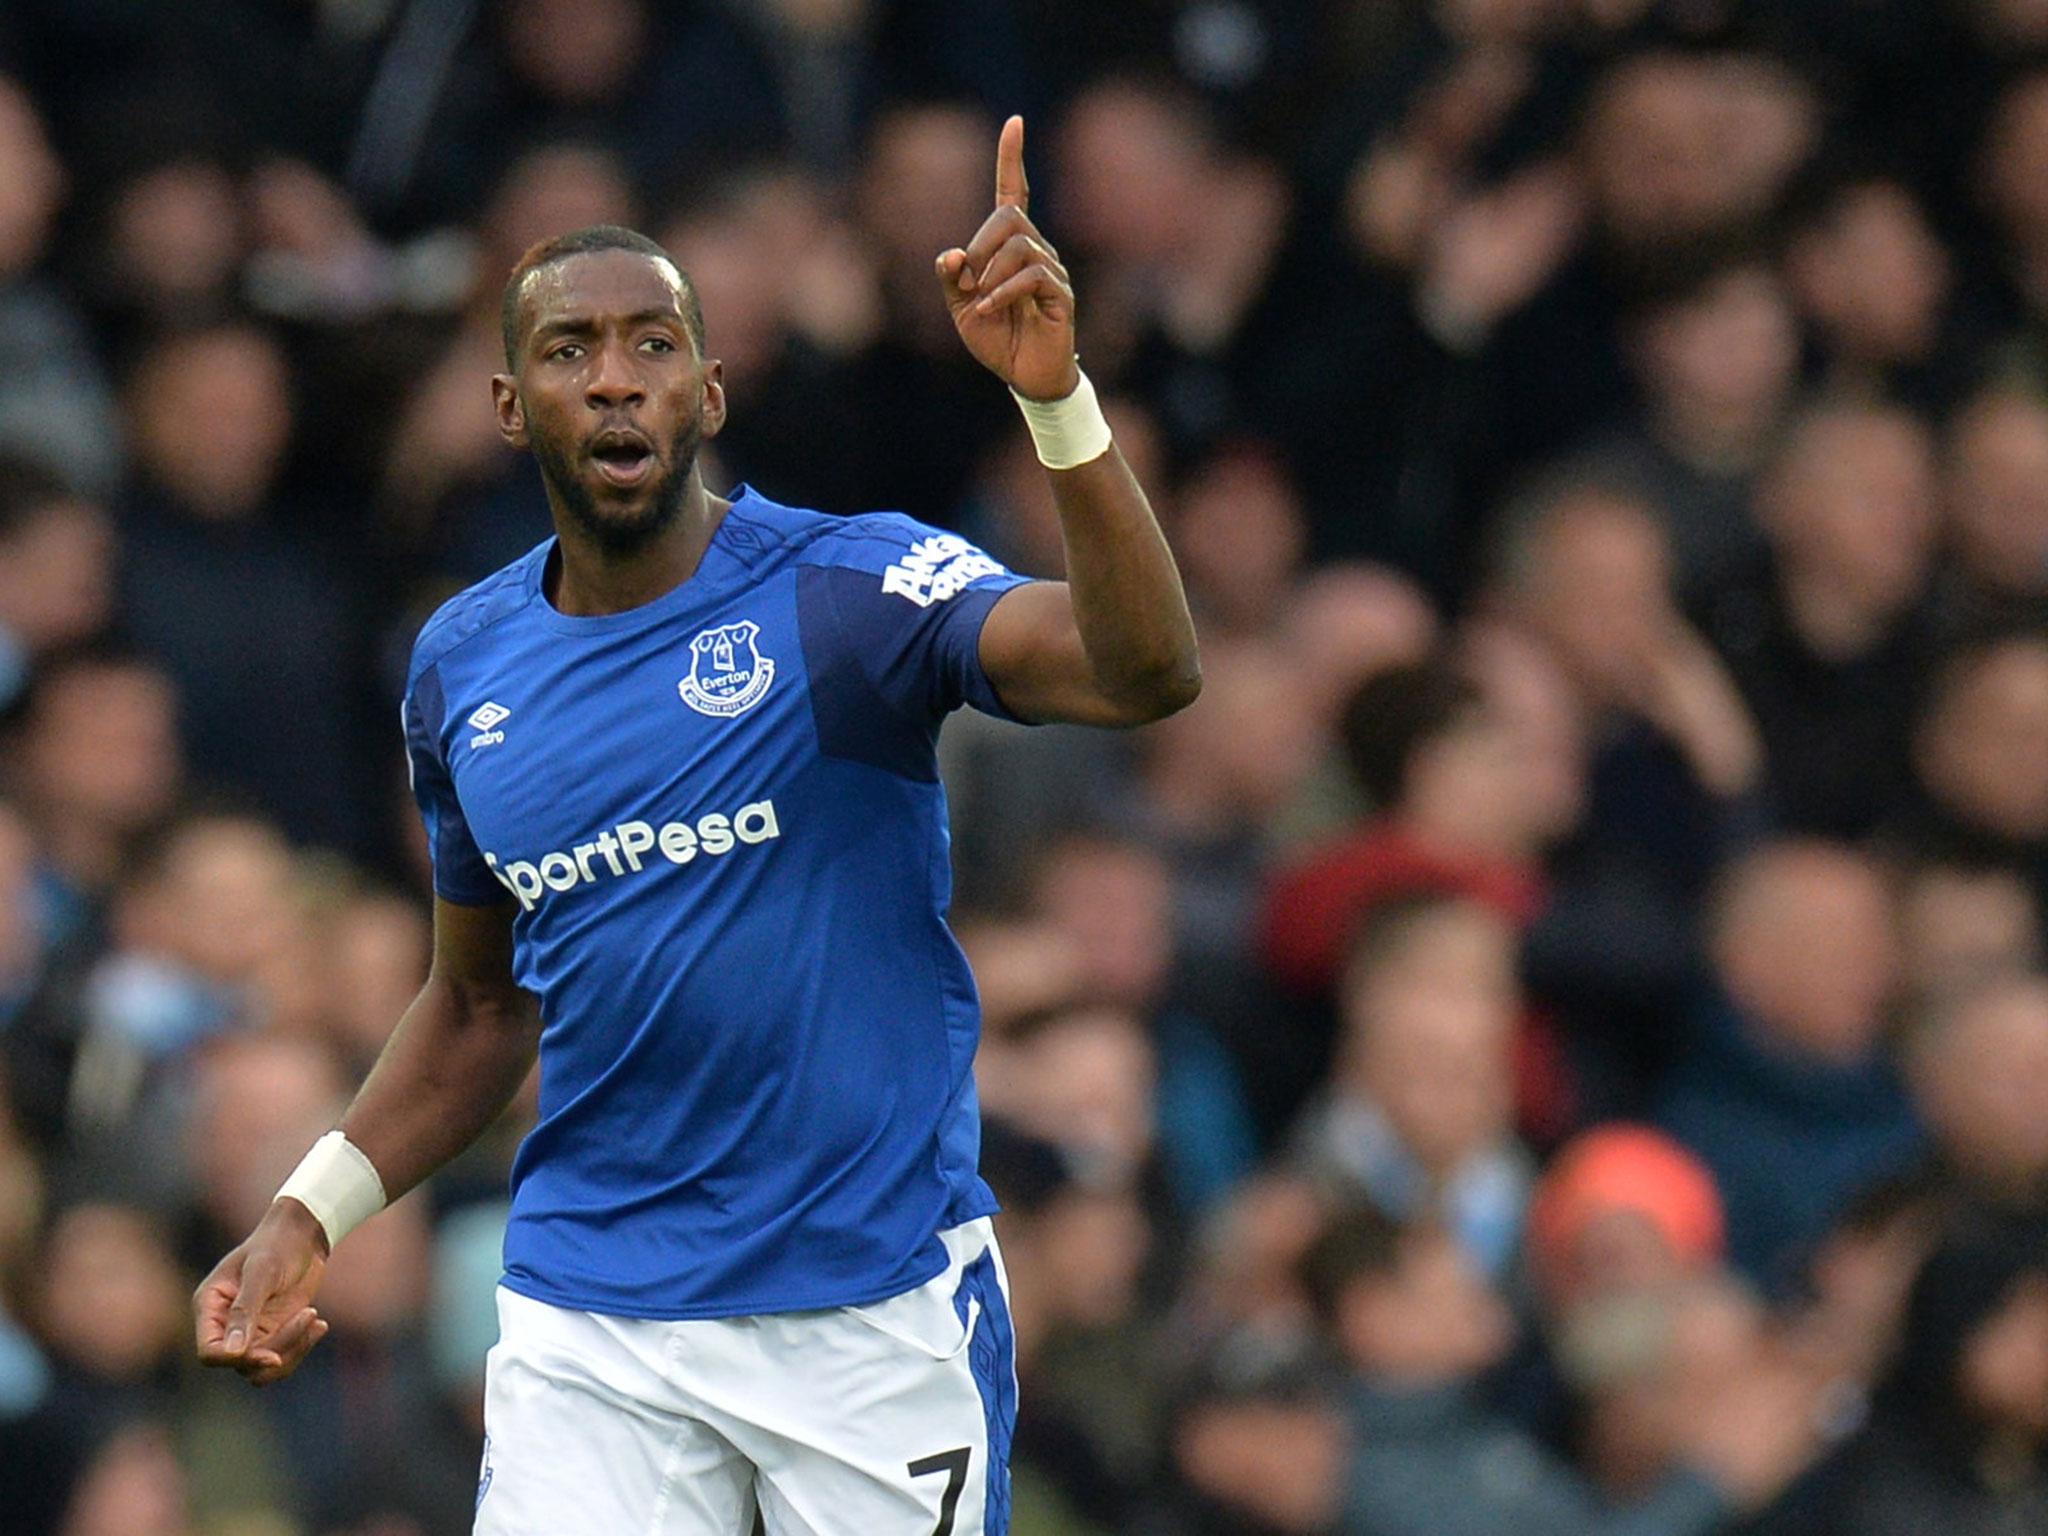 Bolasie's time at Everton was limited by injuries